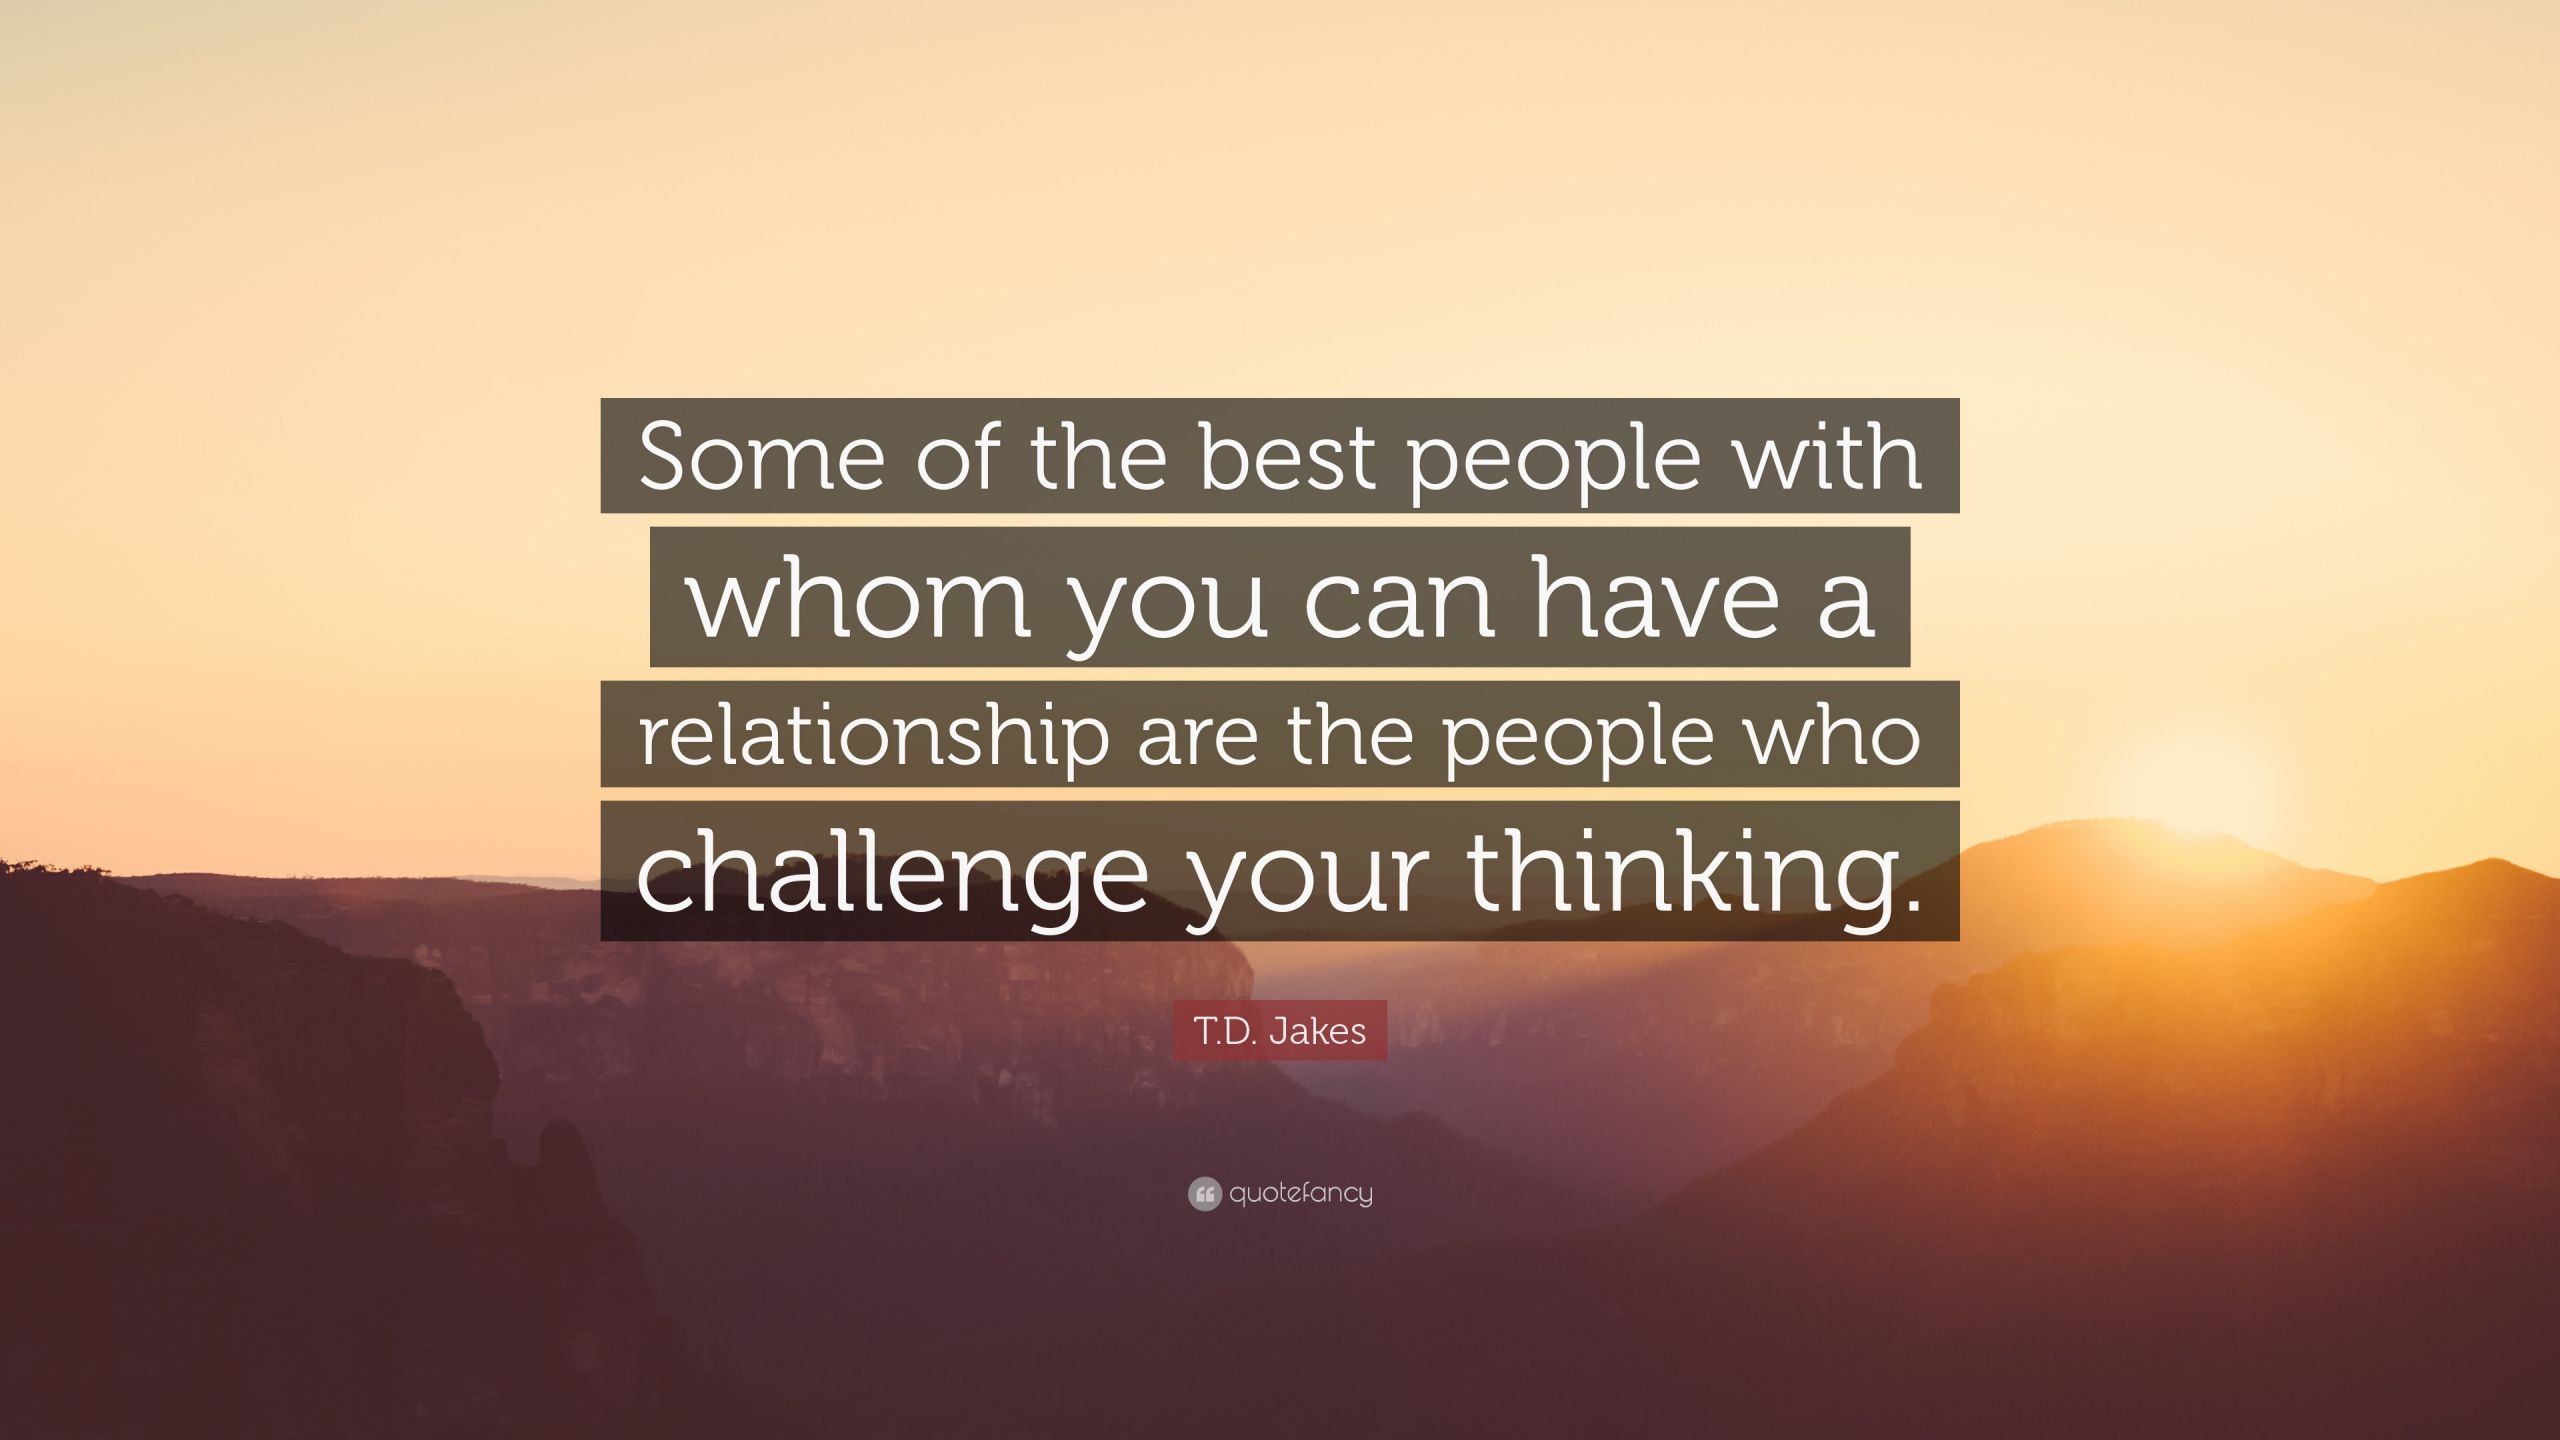 T.D Jakes Quotes On Relationships
 T D Jakes Quote “Some of the best people with whom you